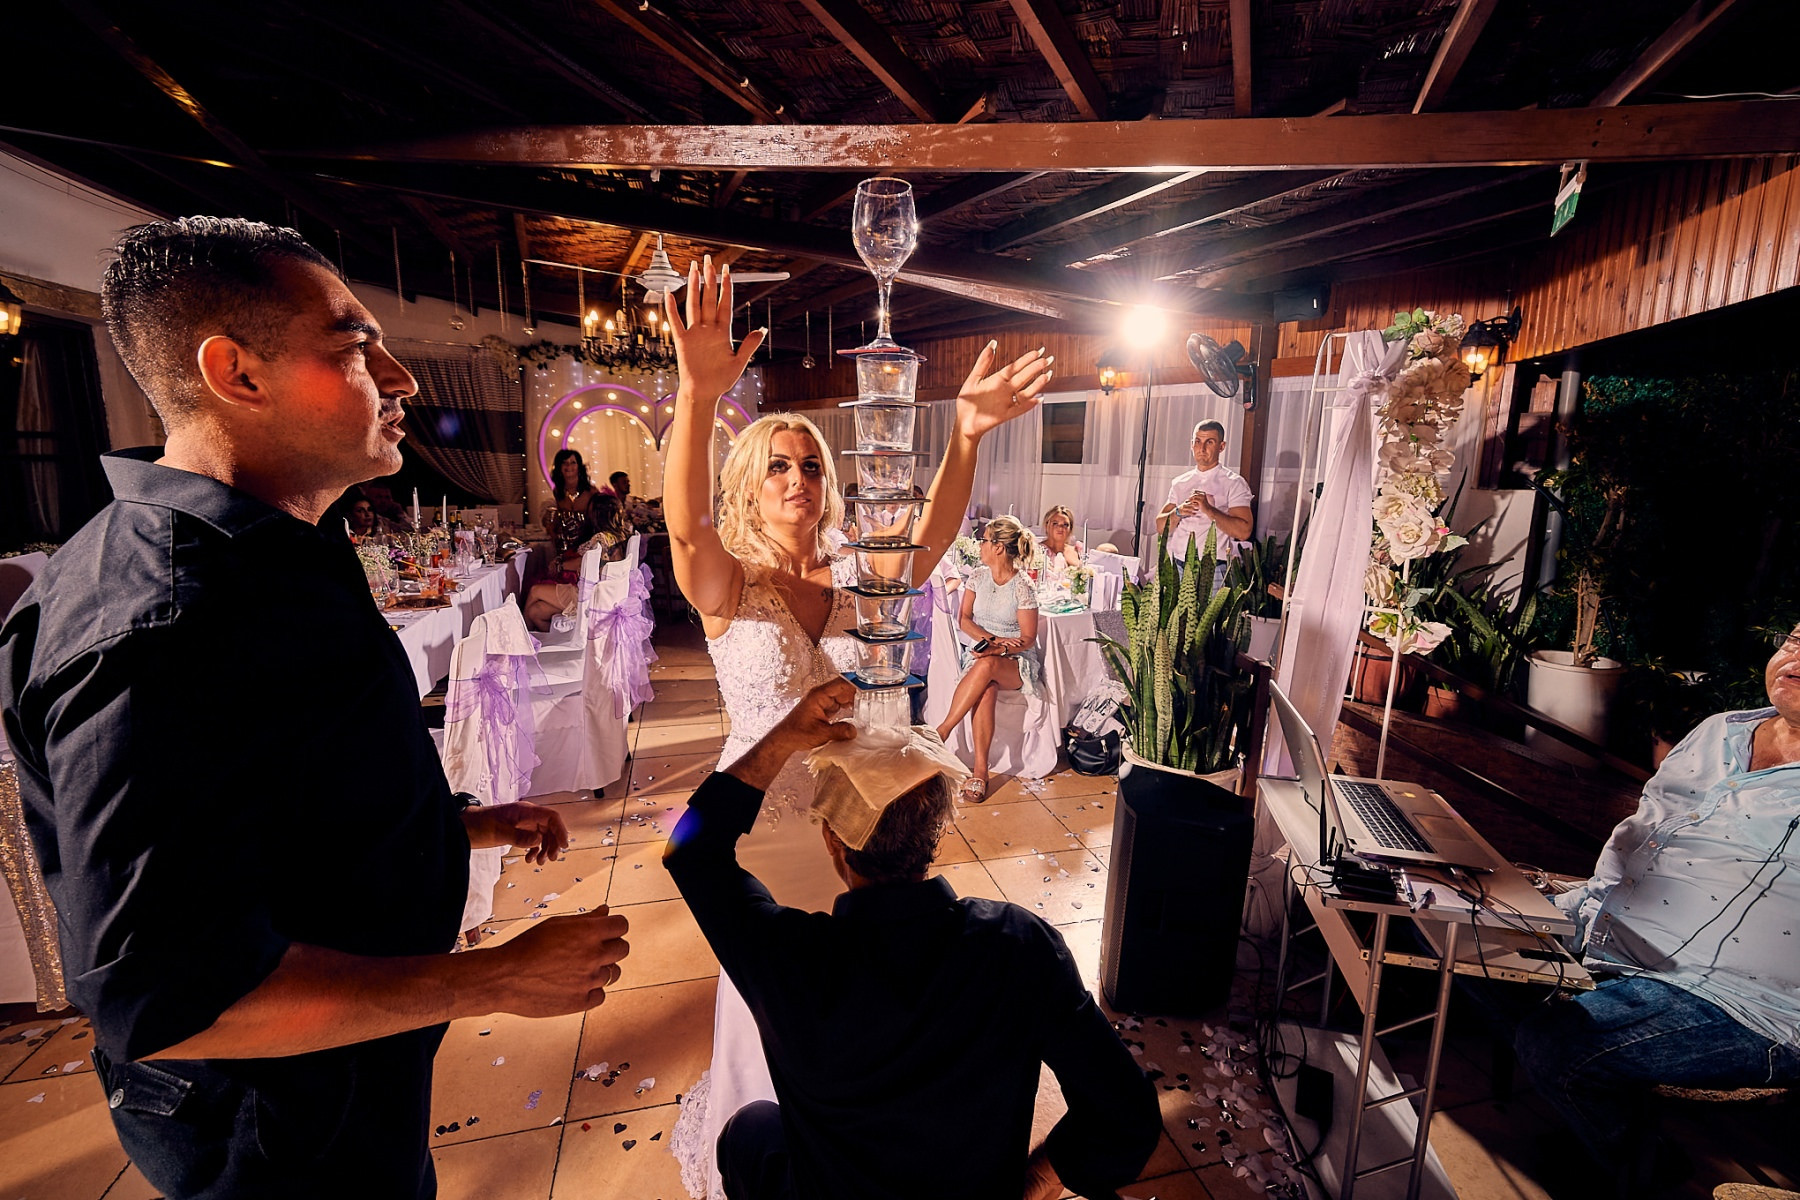 Photograph from a Cyprus Wedding